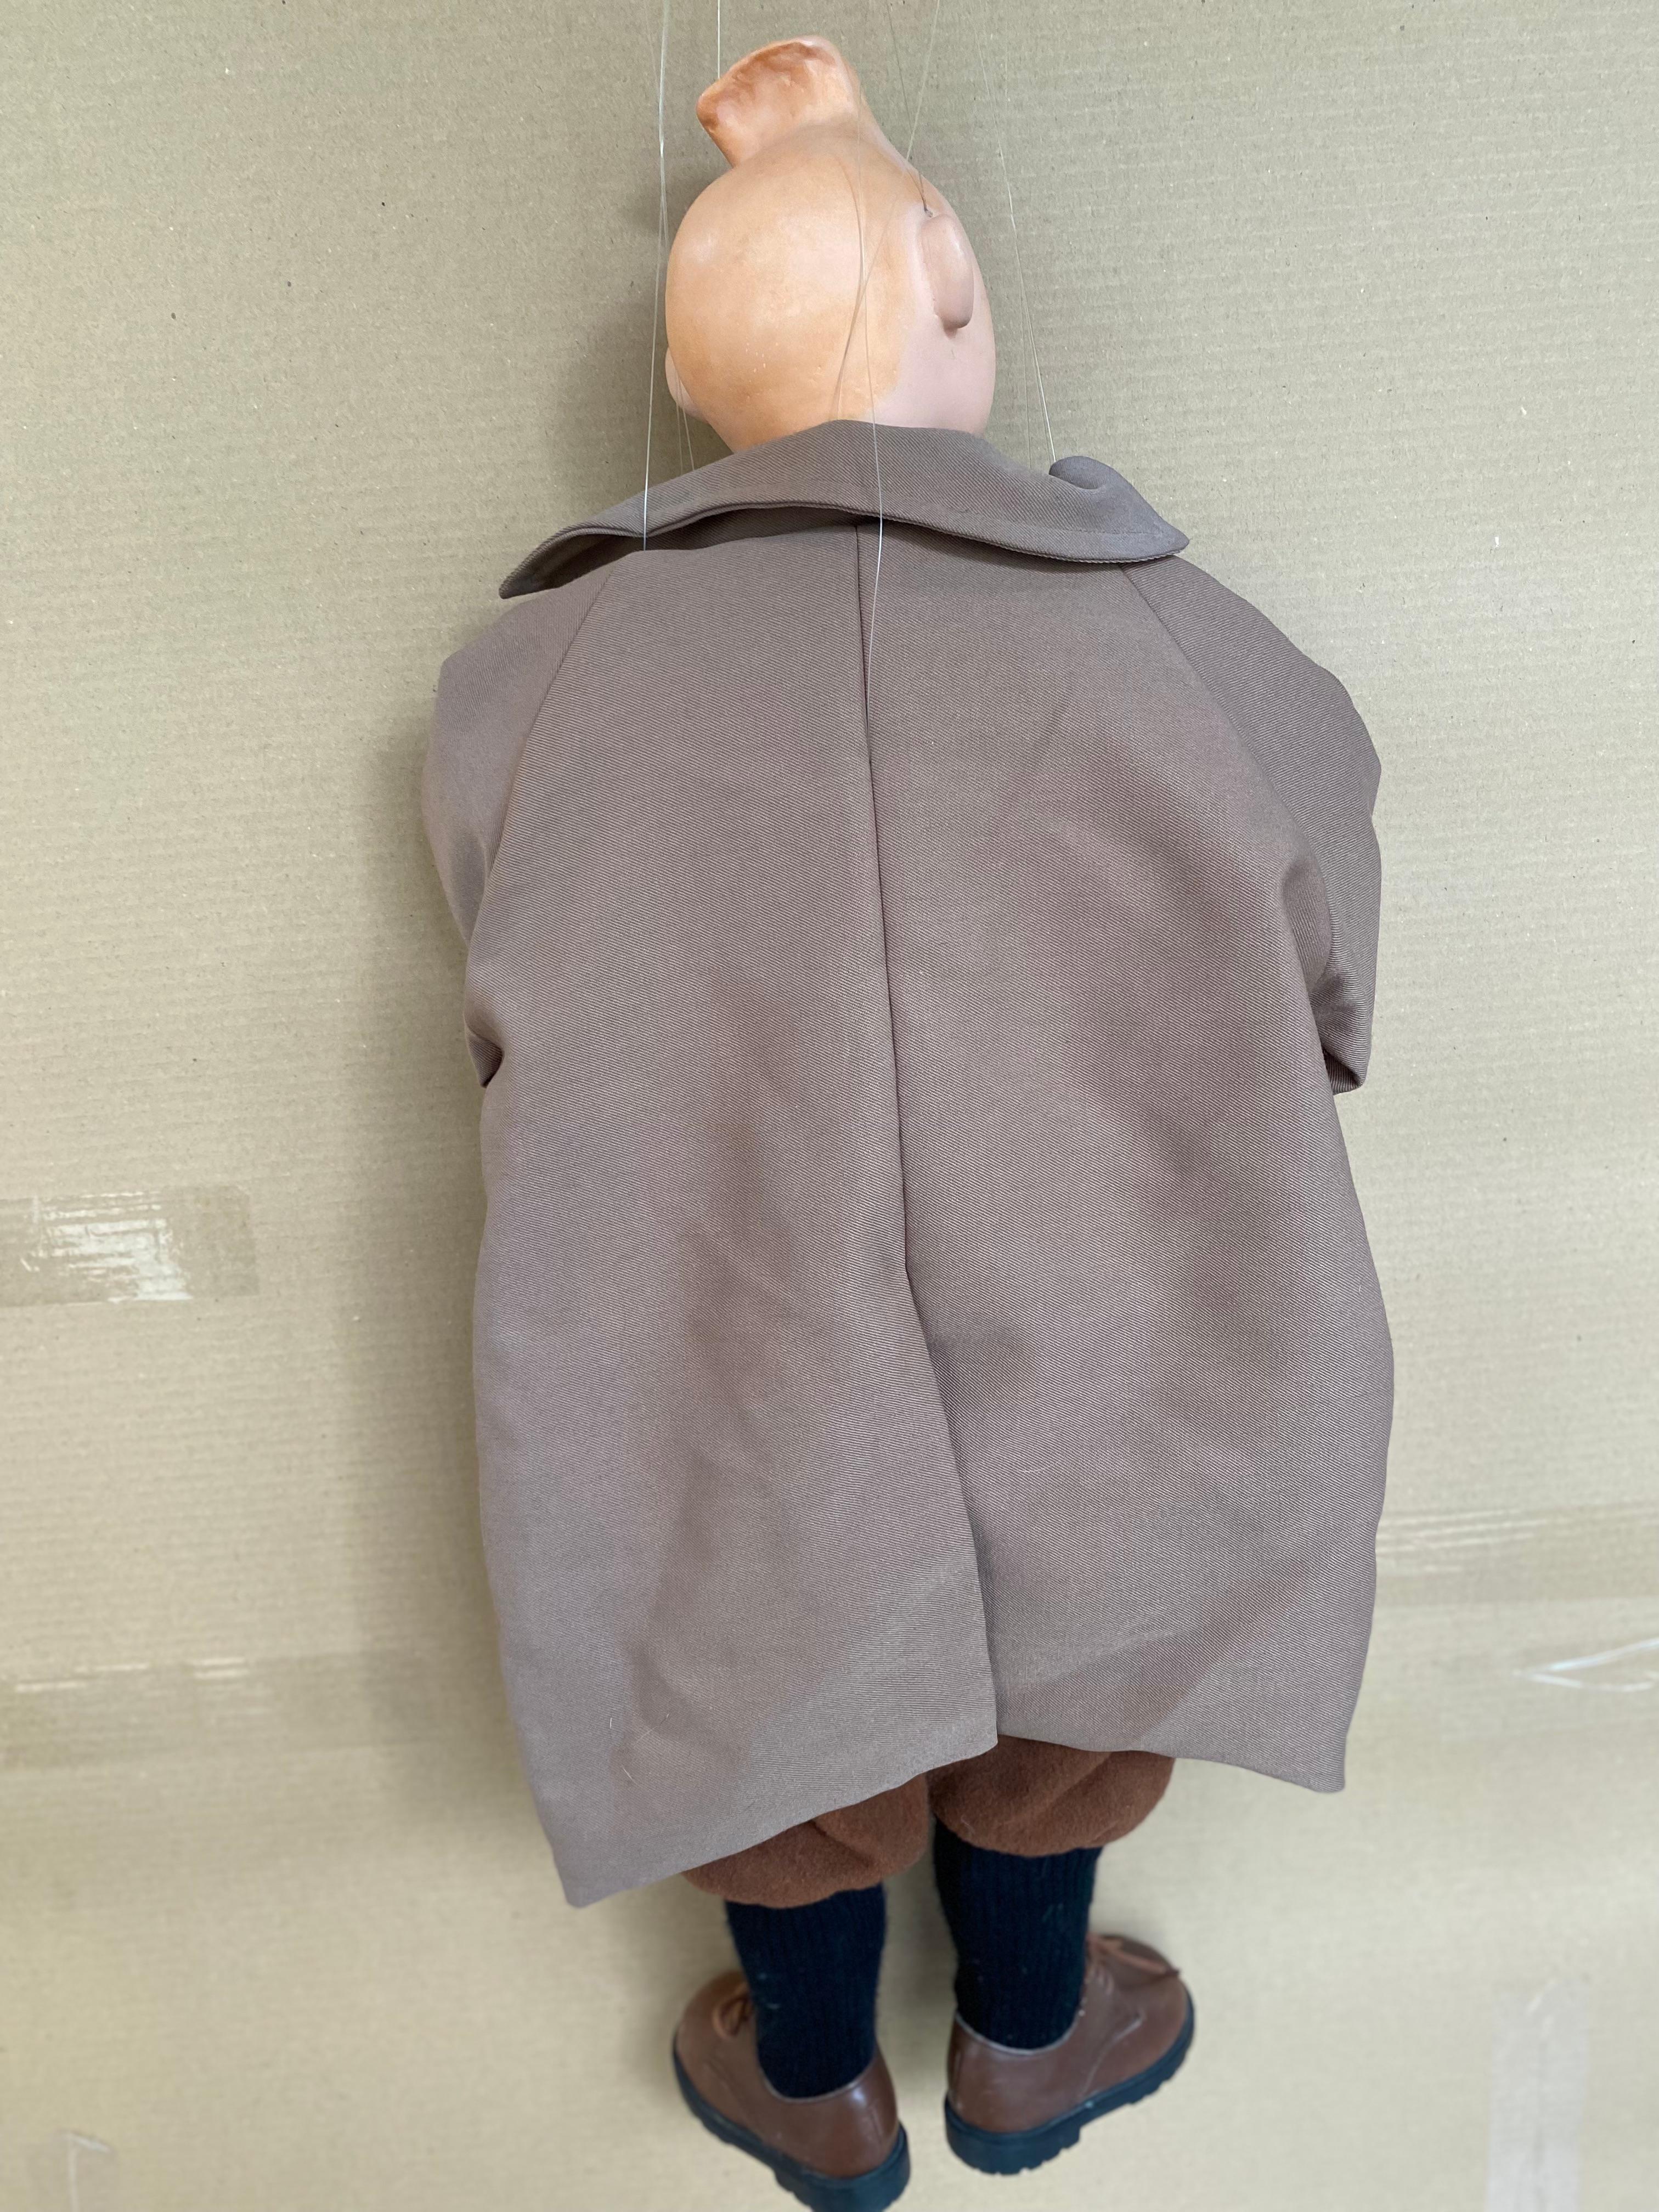 Very Rare Tintin Puppet Hergé, Georges Remi Dit In Good Condition For Sale In Saint ouen, FR